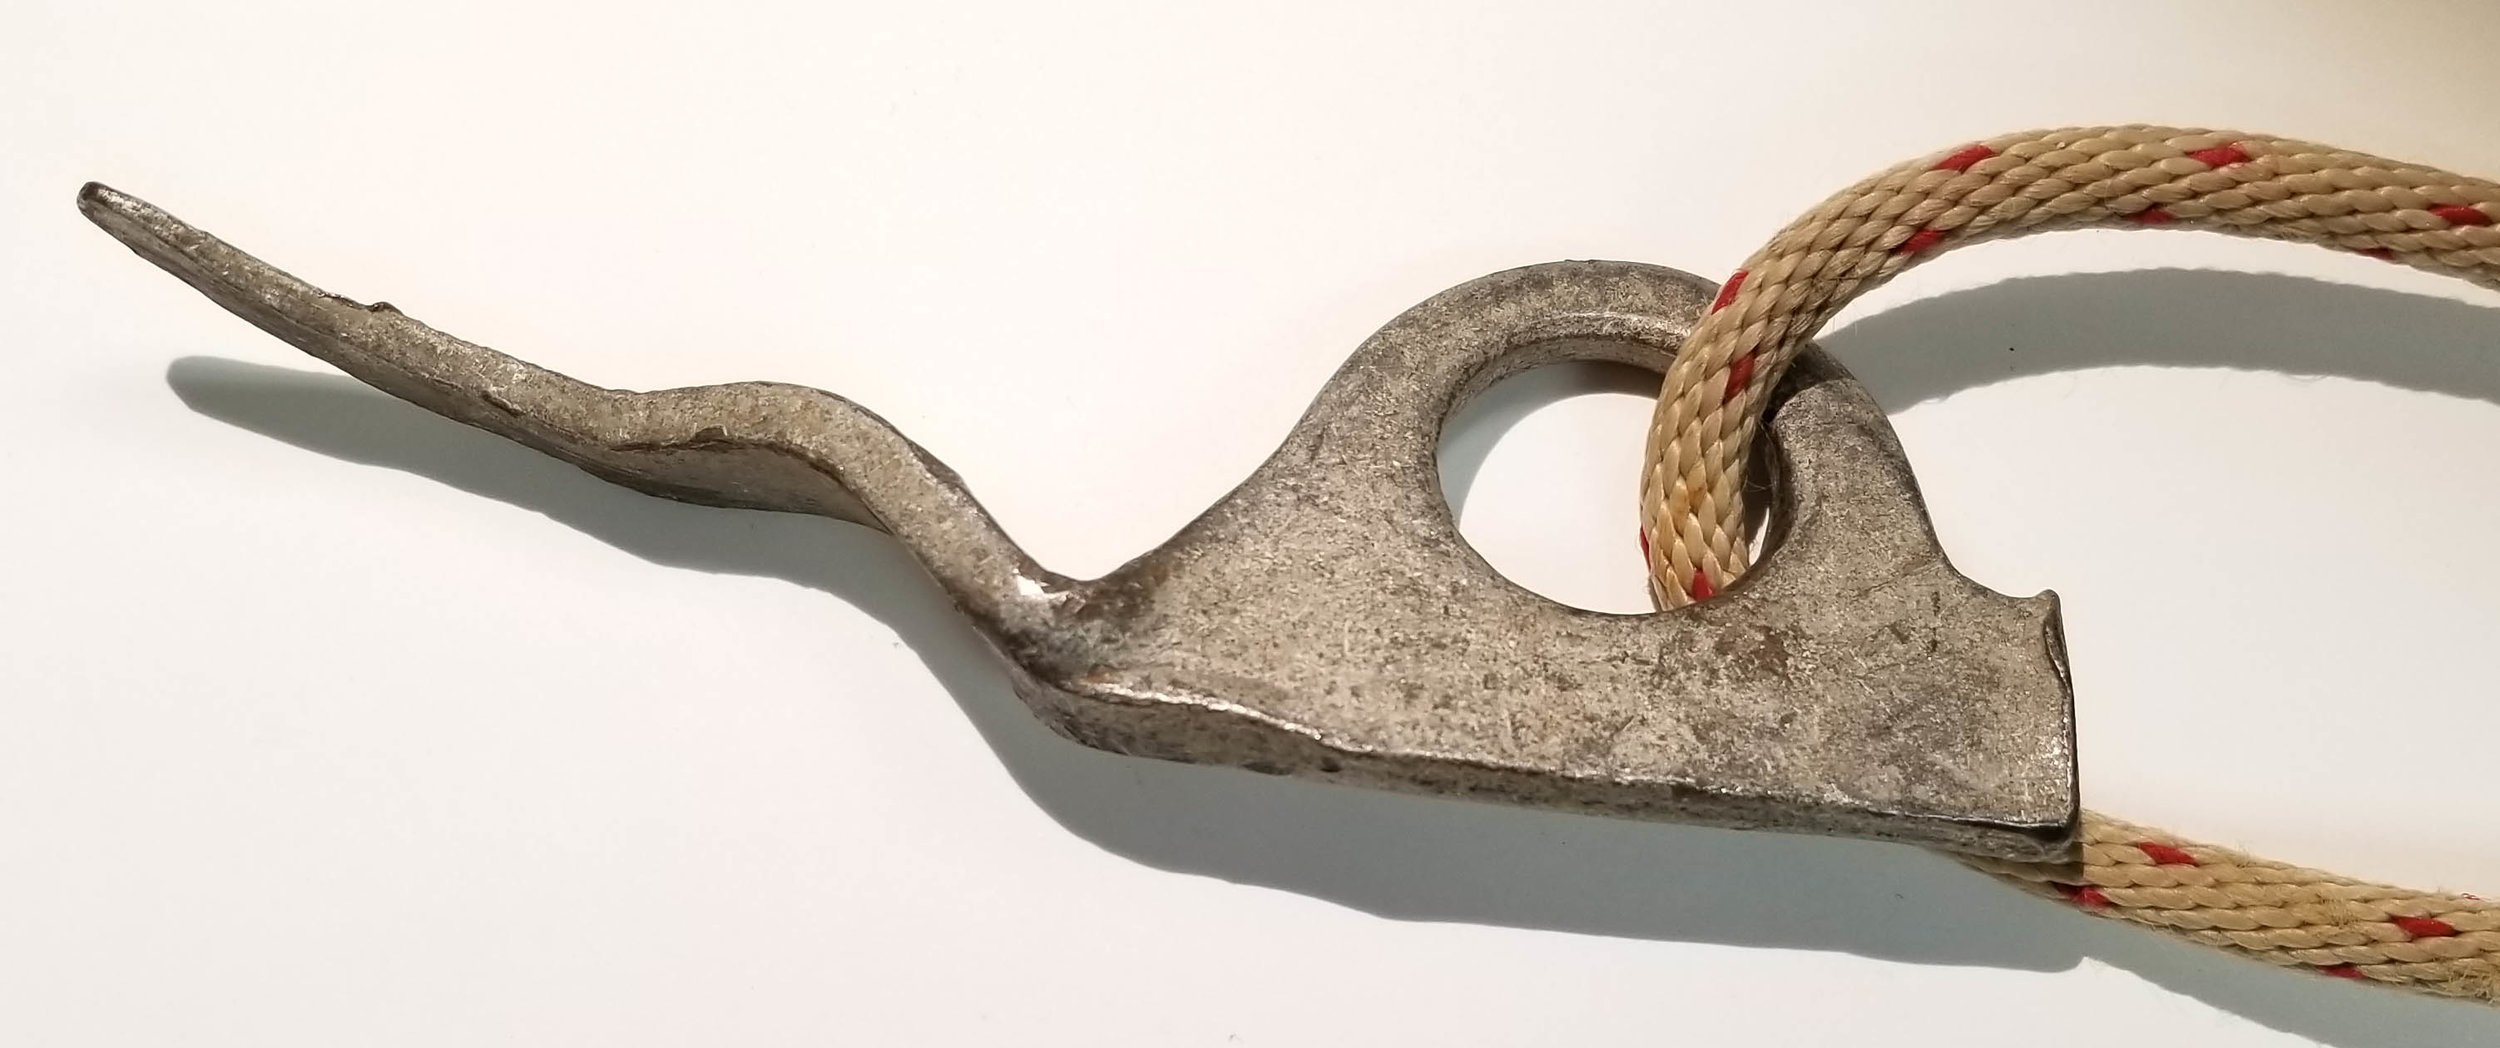 A piton bent by use